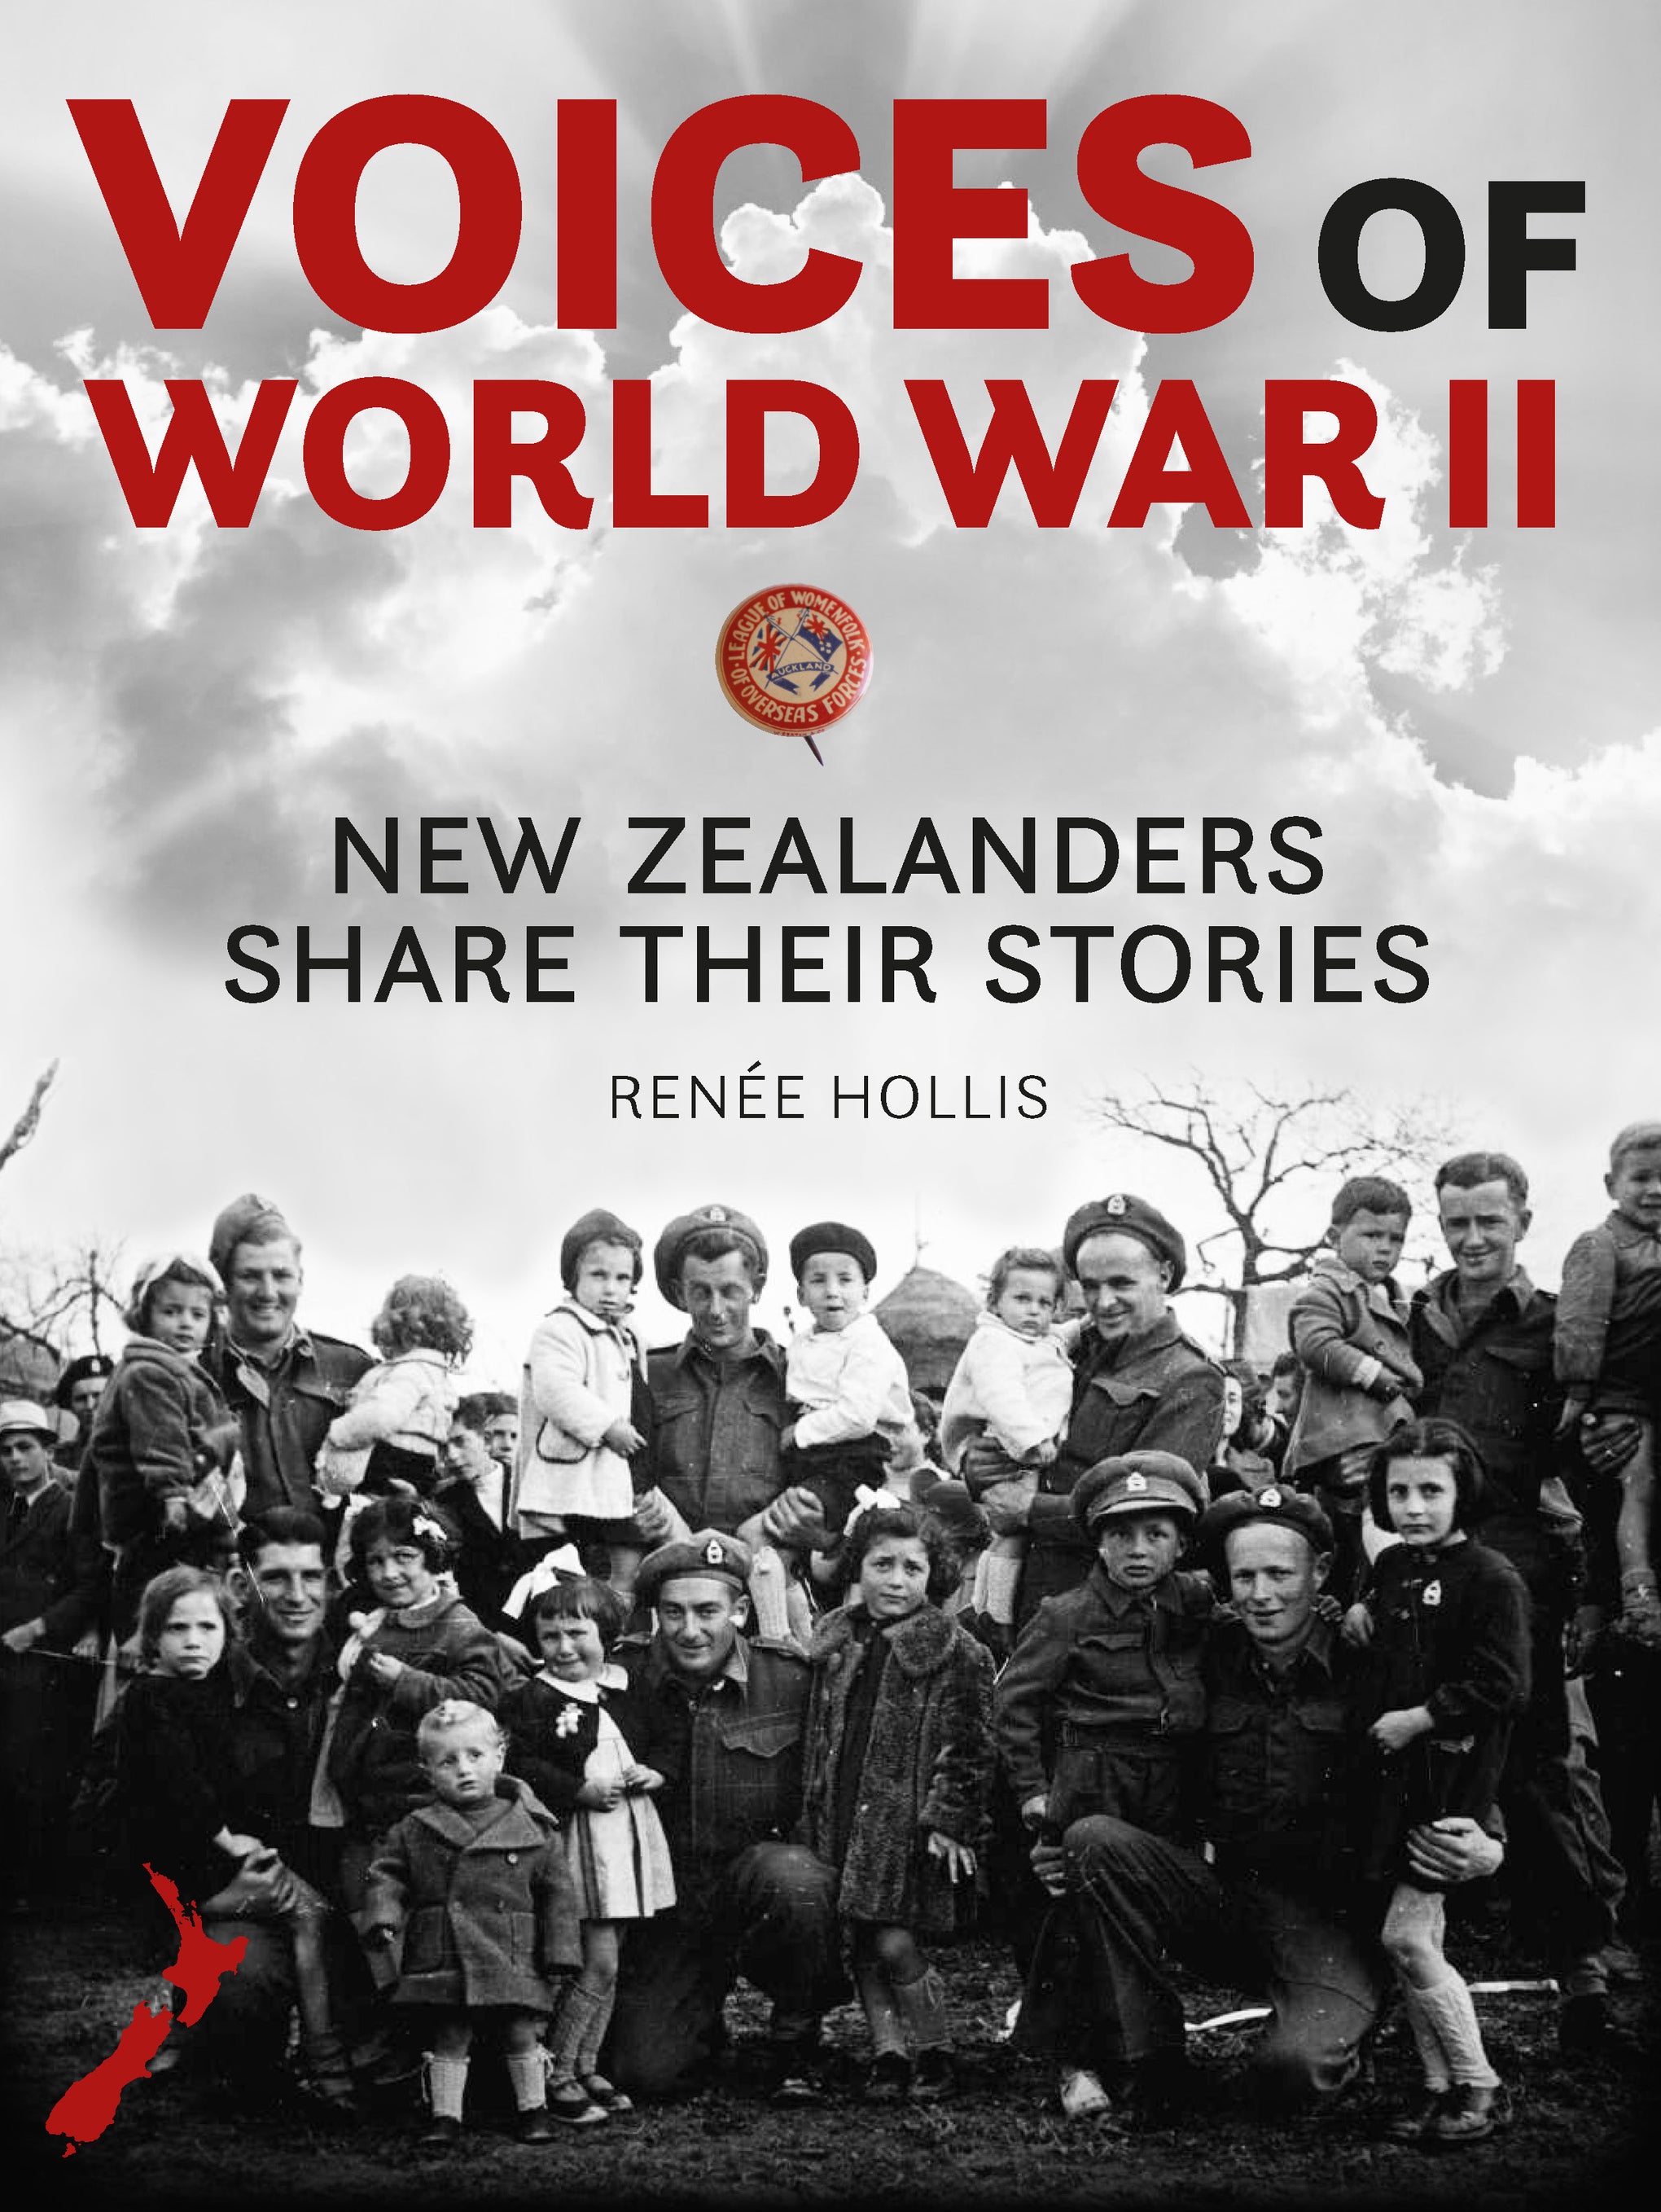 Voices of World War II: New Zealanders Share Their Stories